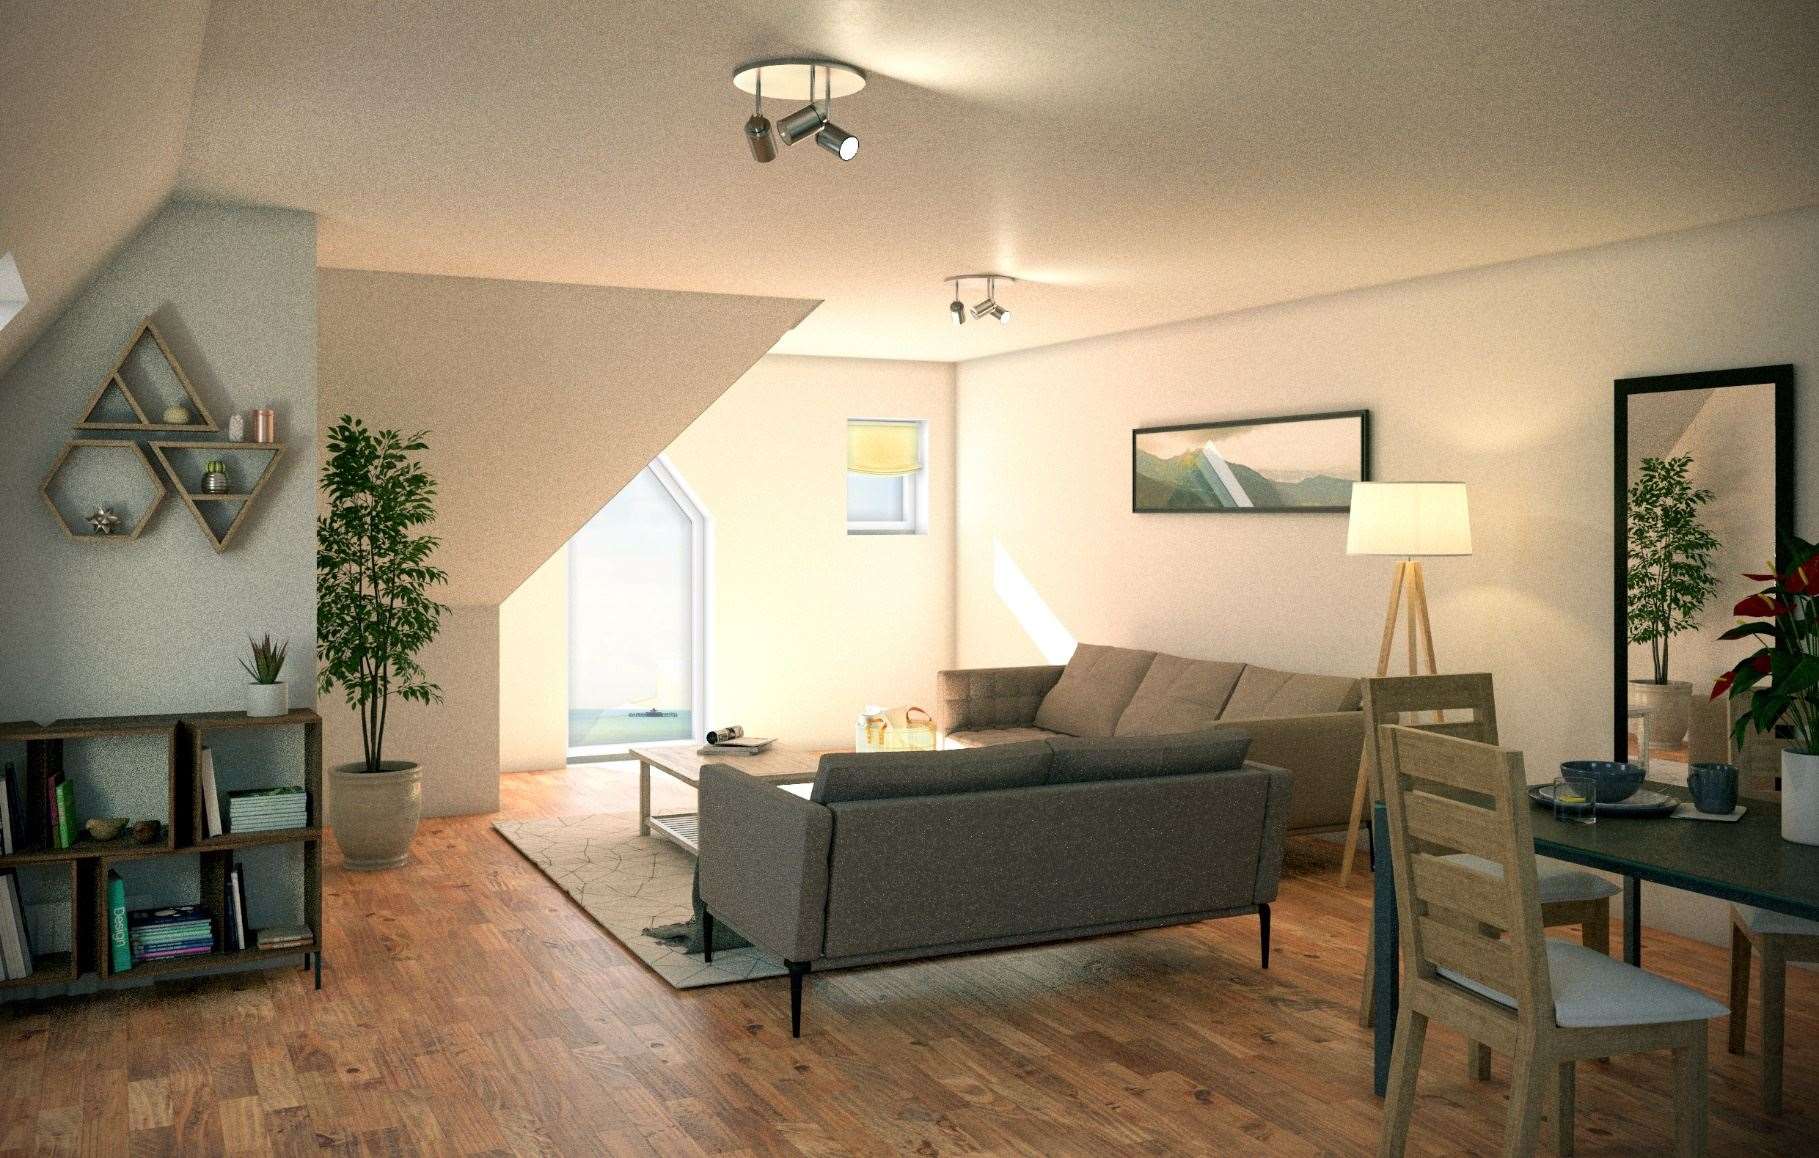 Prices of the new flats on the Herne Bay sea front range form £300,000 to £600,000. Photo: Miles & Barr